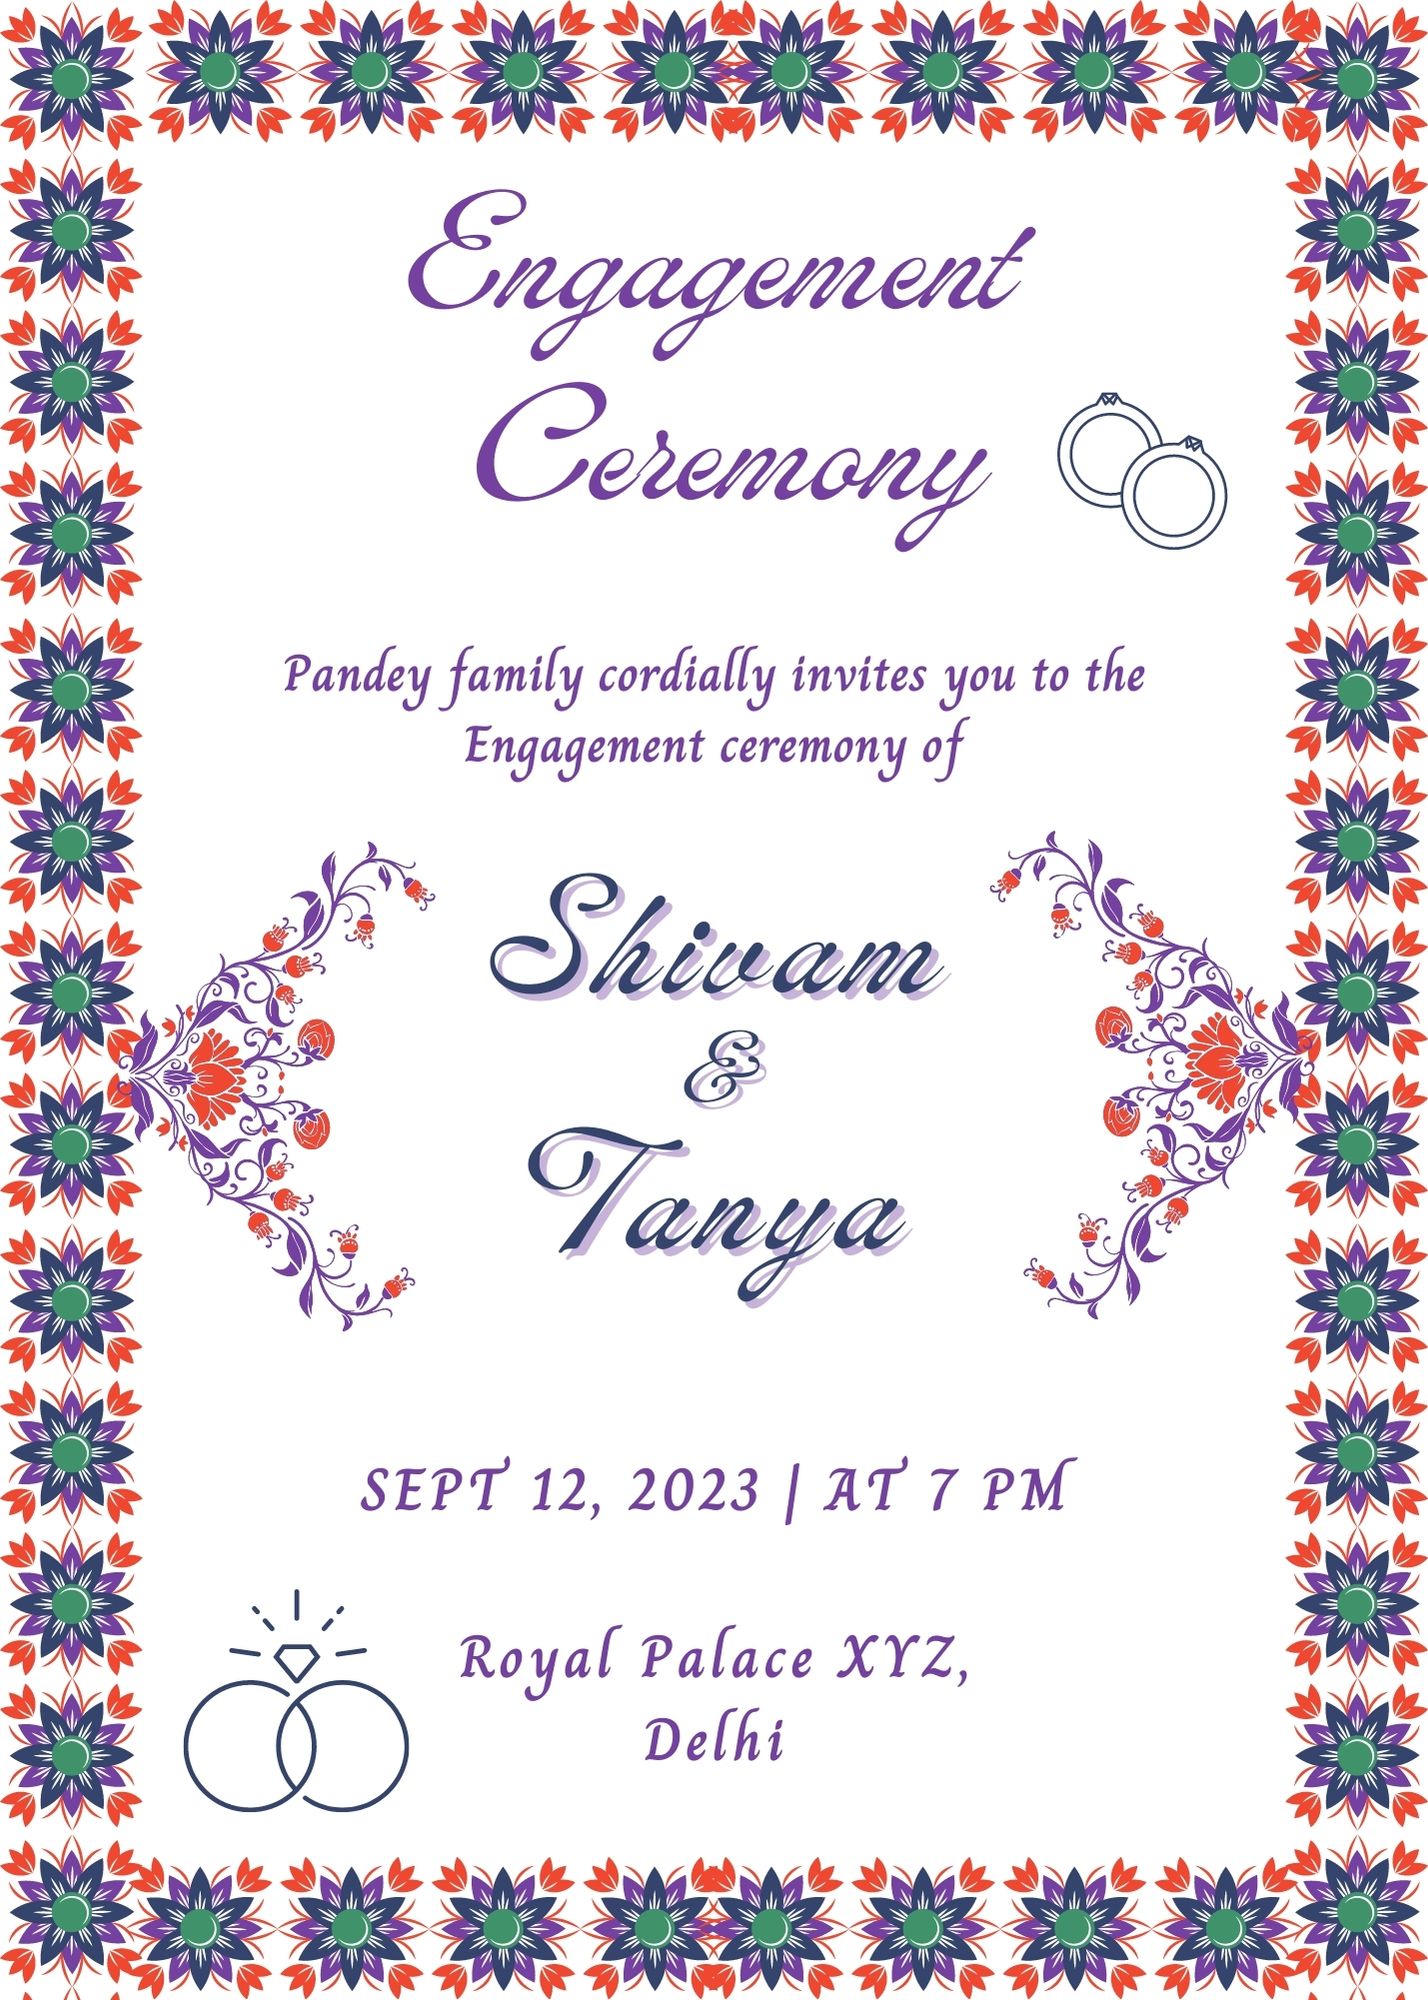 Ring ceremony card download free